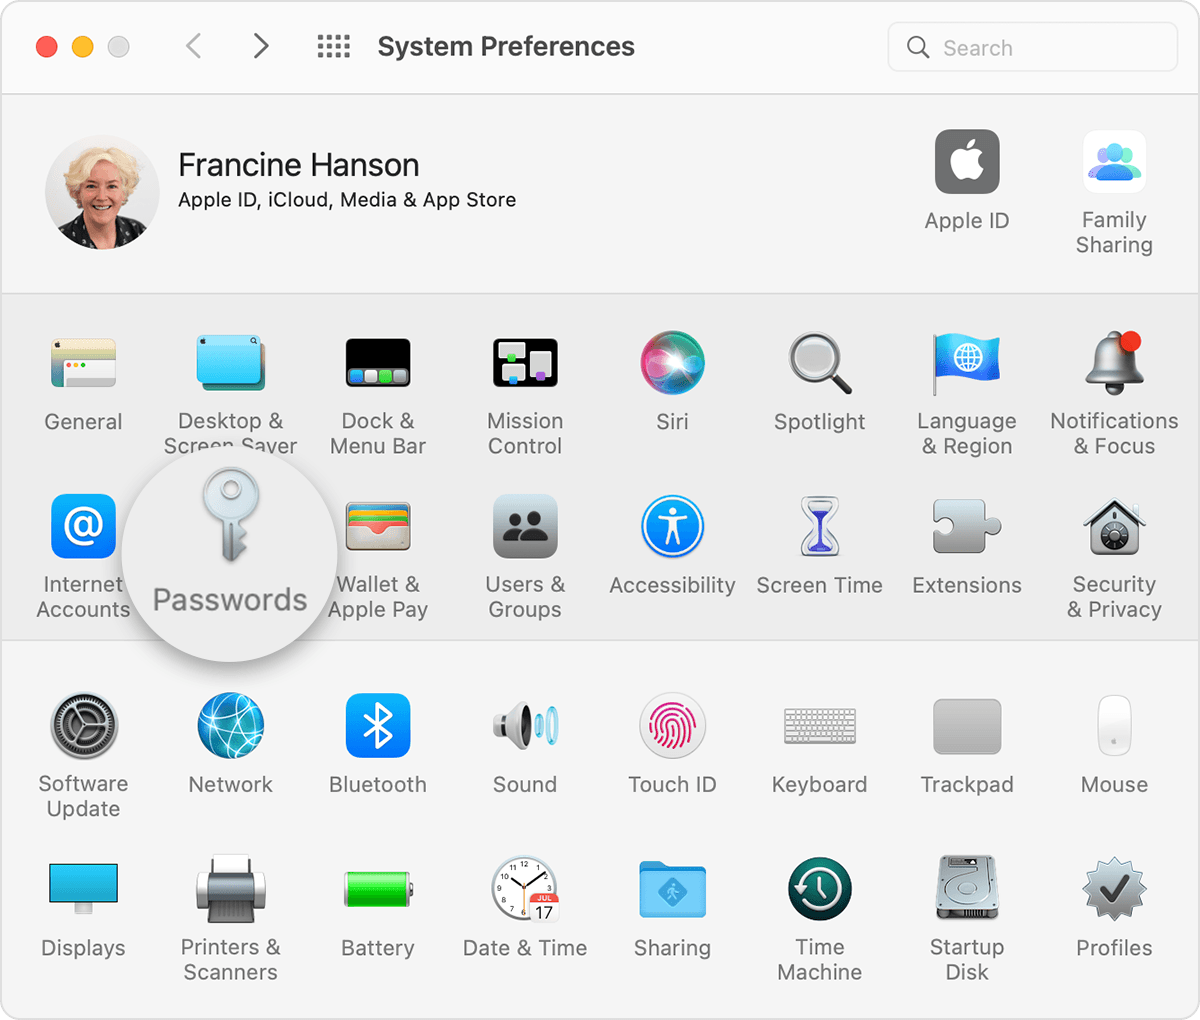 In the macOS System Preferences menu, Passwords is next to Internet Accounts and Wallet & Apple Pay.